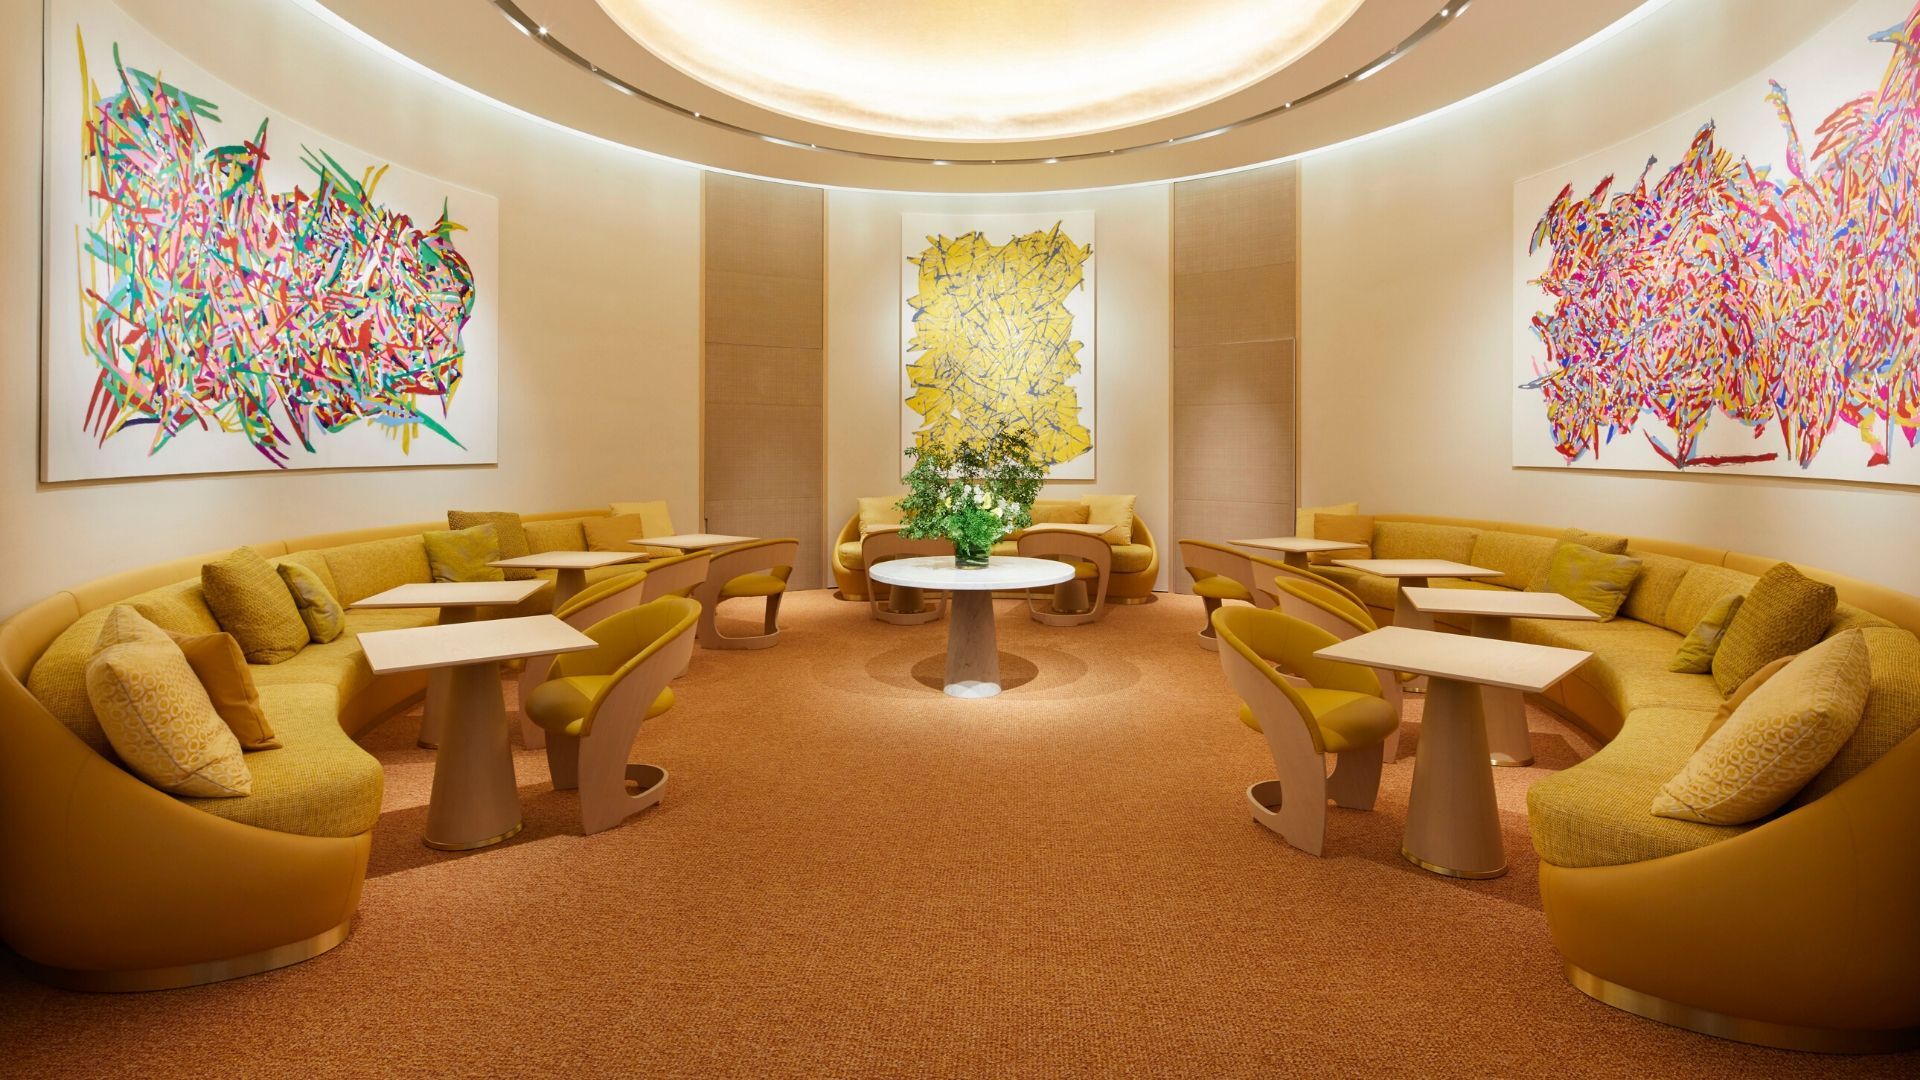 Louis Vuitton on X: Have a seat. The bar at Le Café V inside the